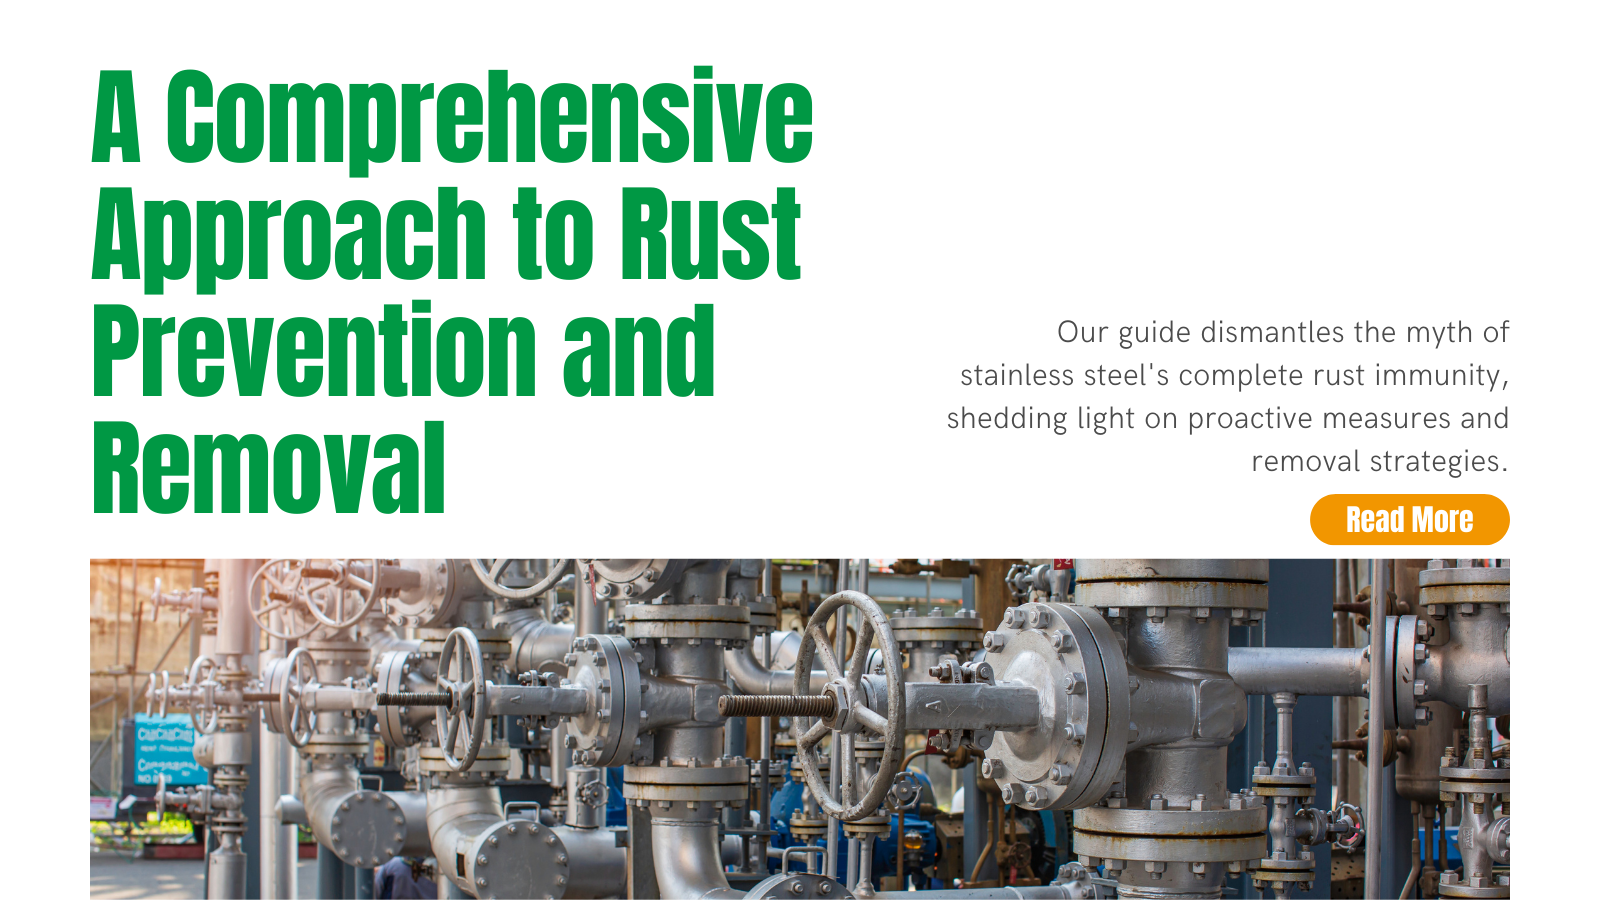 Safeguarding Stainless Steel Excellence: A Comprehensive Approach to Rust Prevention and Removal| INOX-TEK